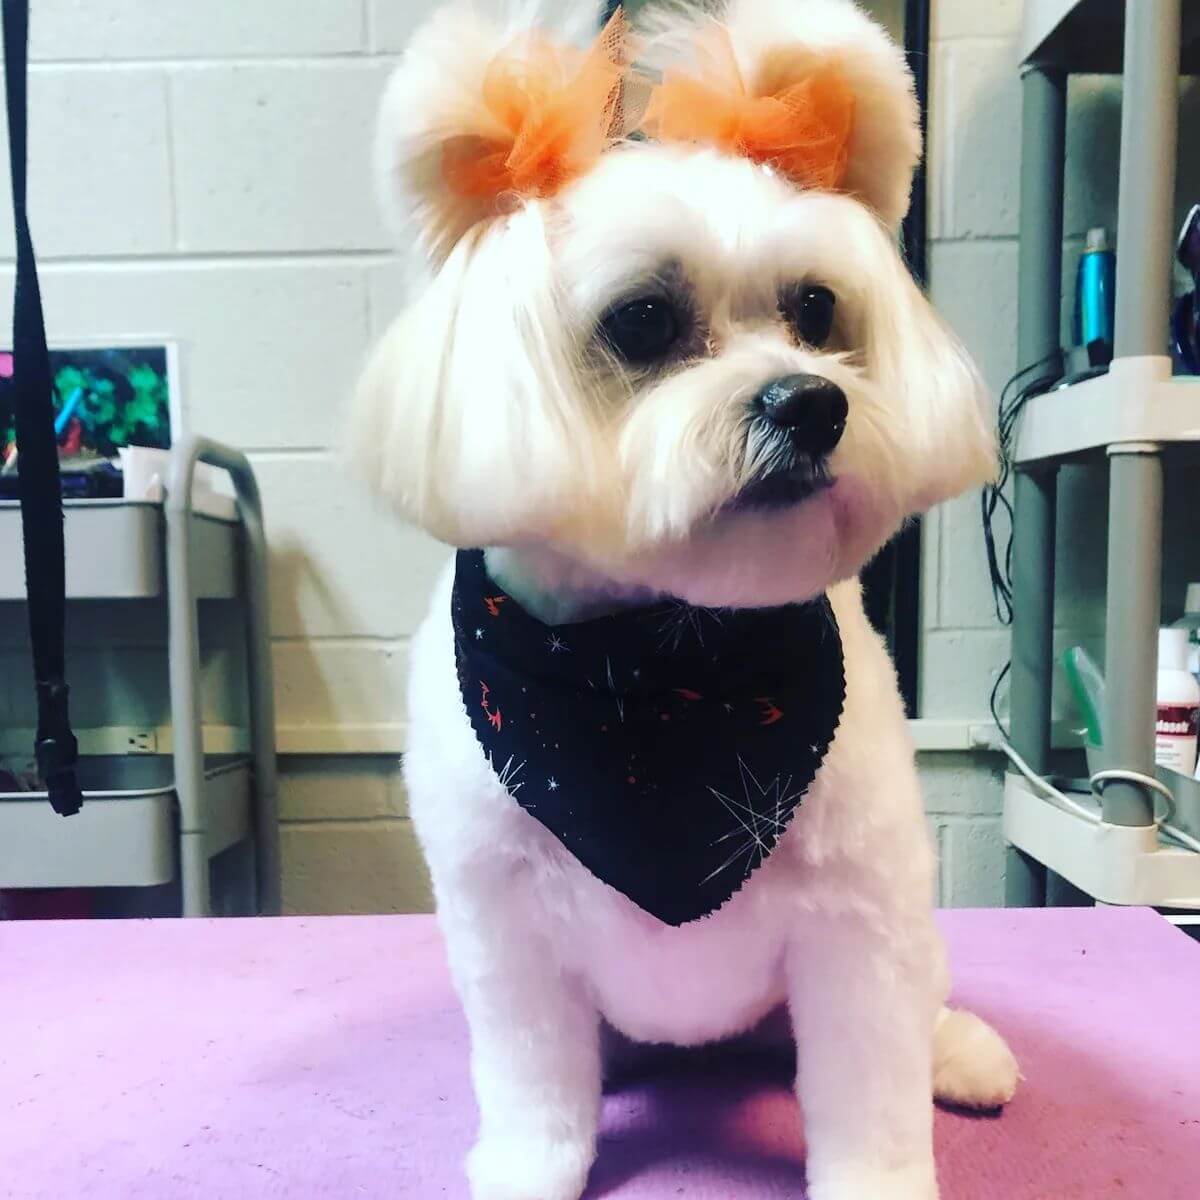 Dog with fancy groomed hair